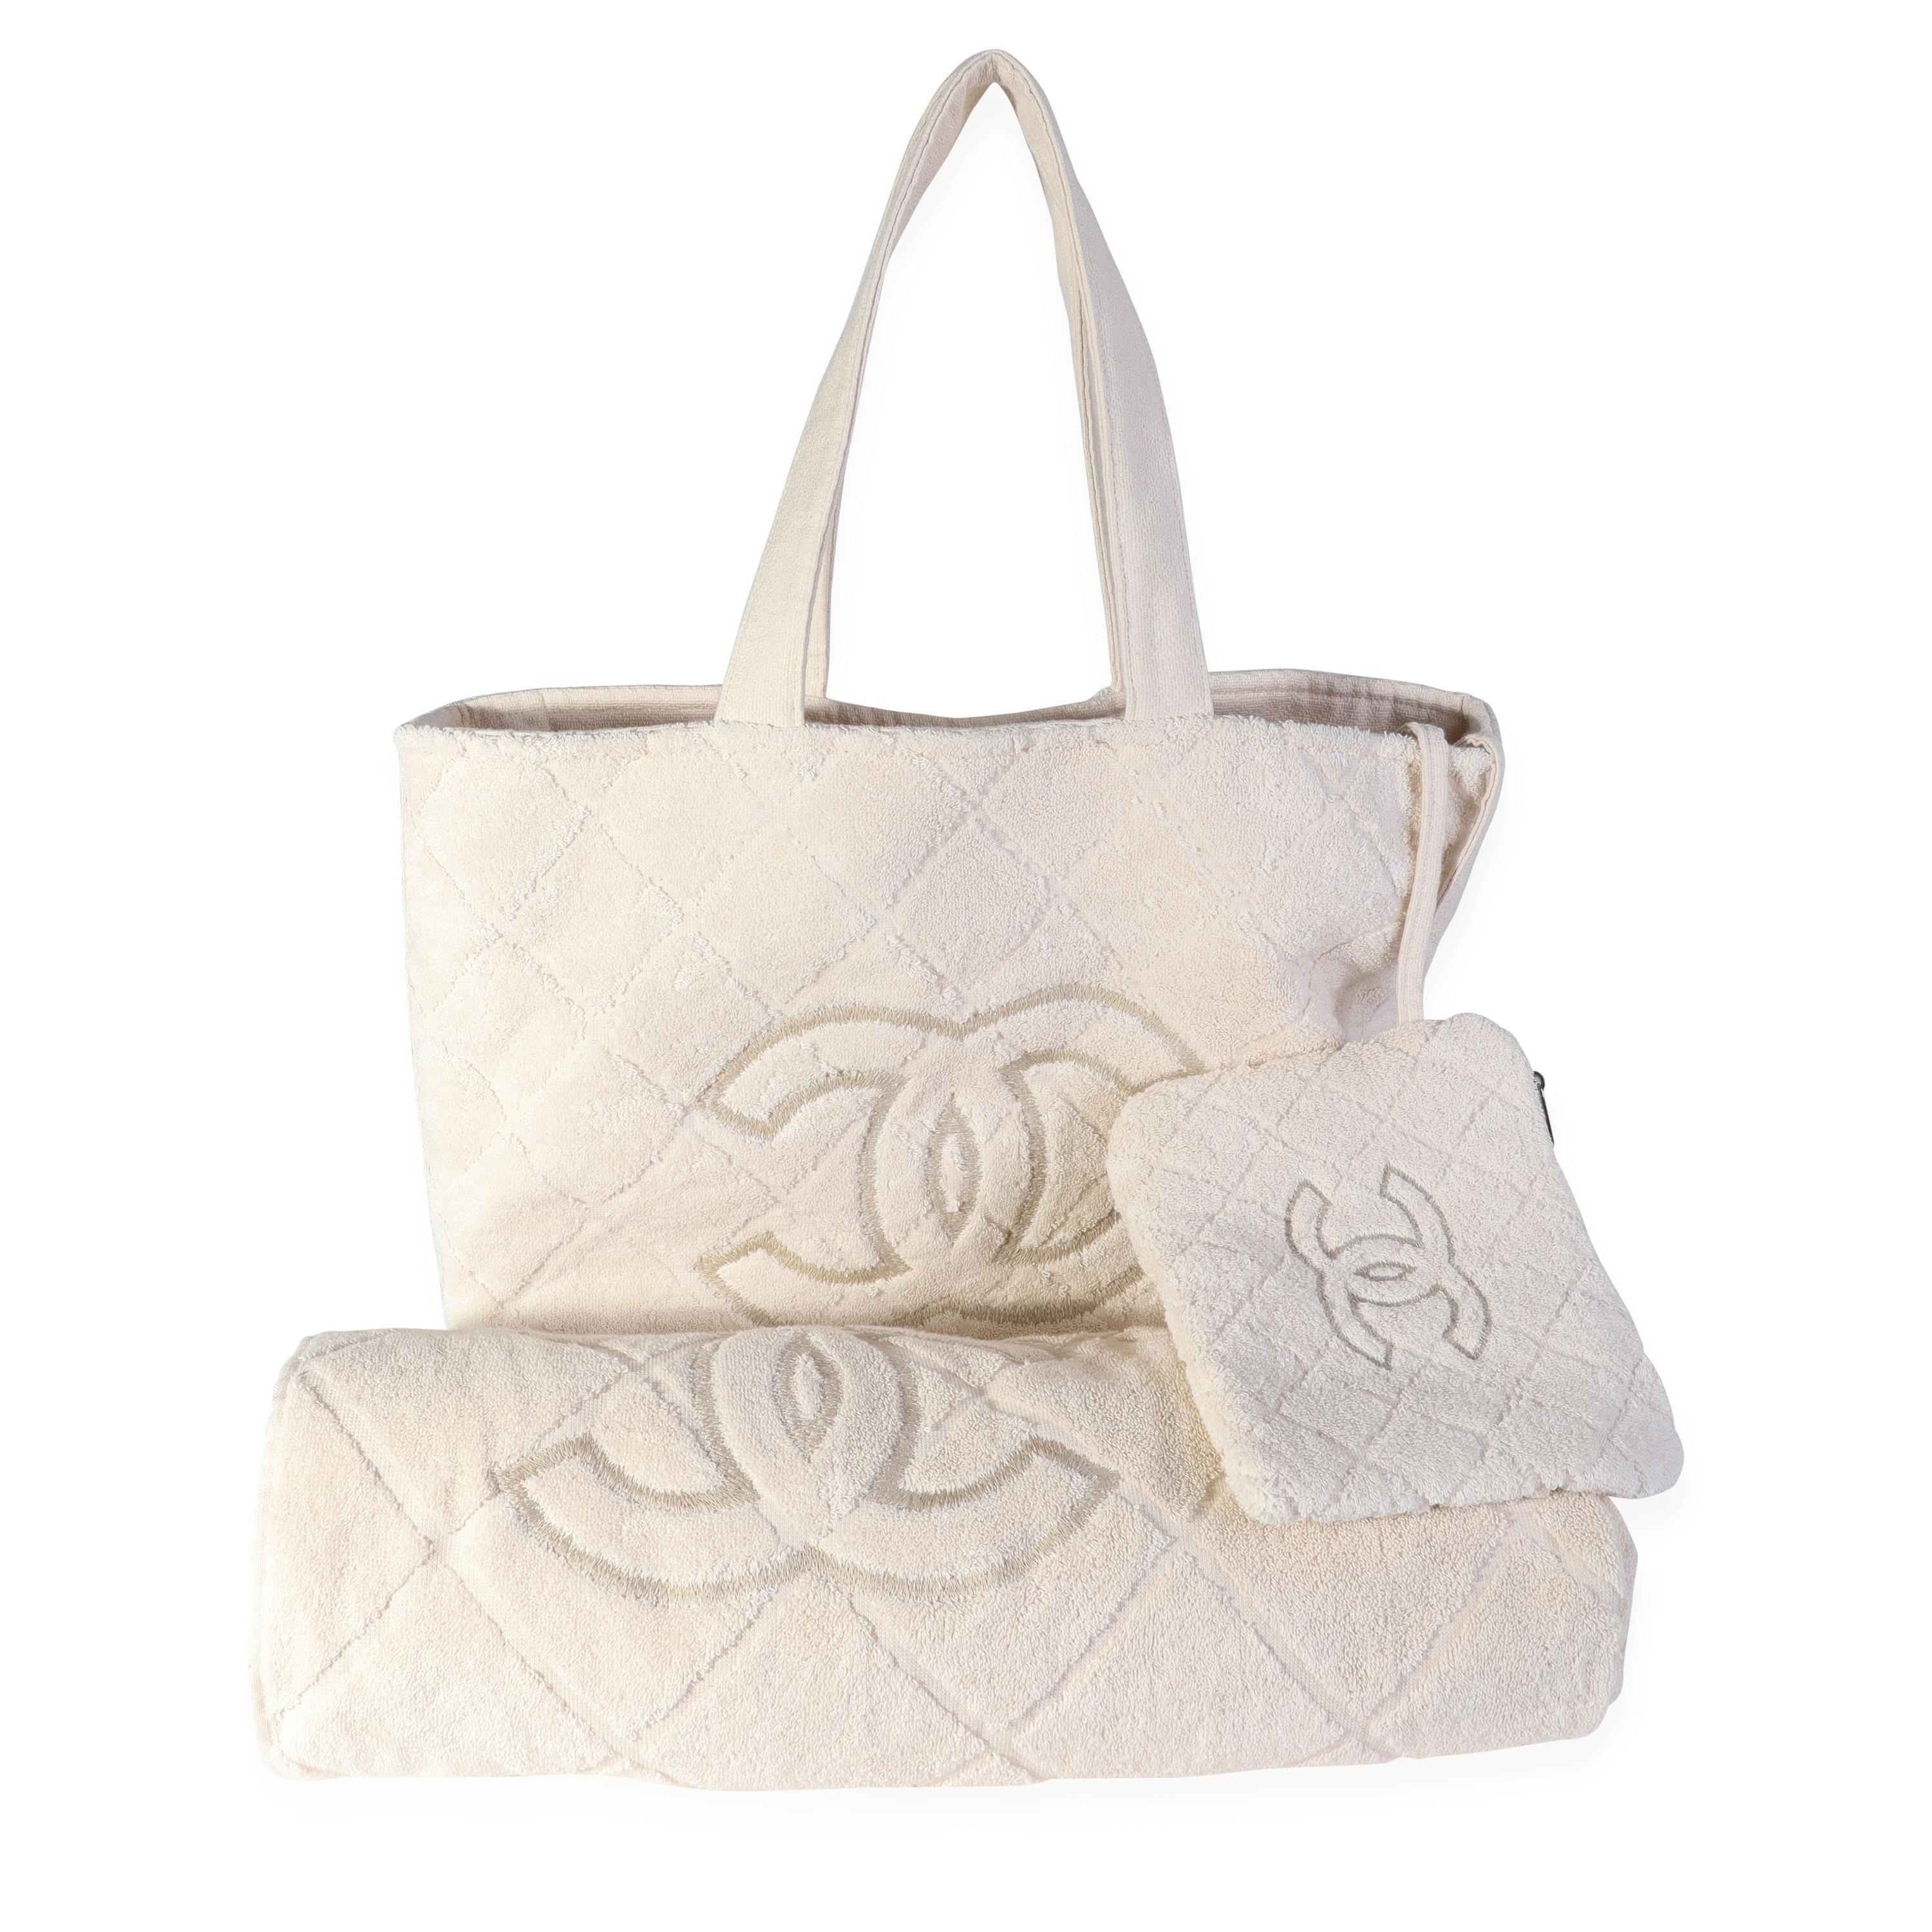 Listing Title: Chanel Cream Terry Beach Tote with Towel and Pouch
SKU: 116653
Condition: Pre-owned (3000)
Handbag Condition: Mint
Condition Comments: Mint Condition. No visible signs of wear. Tag attached to interior of tote. Final sale.
Brand: